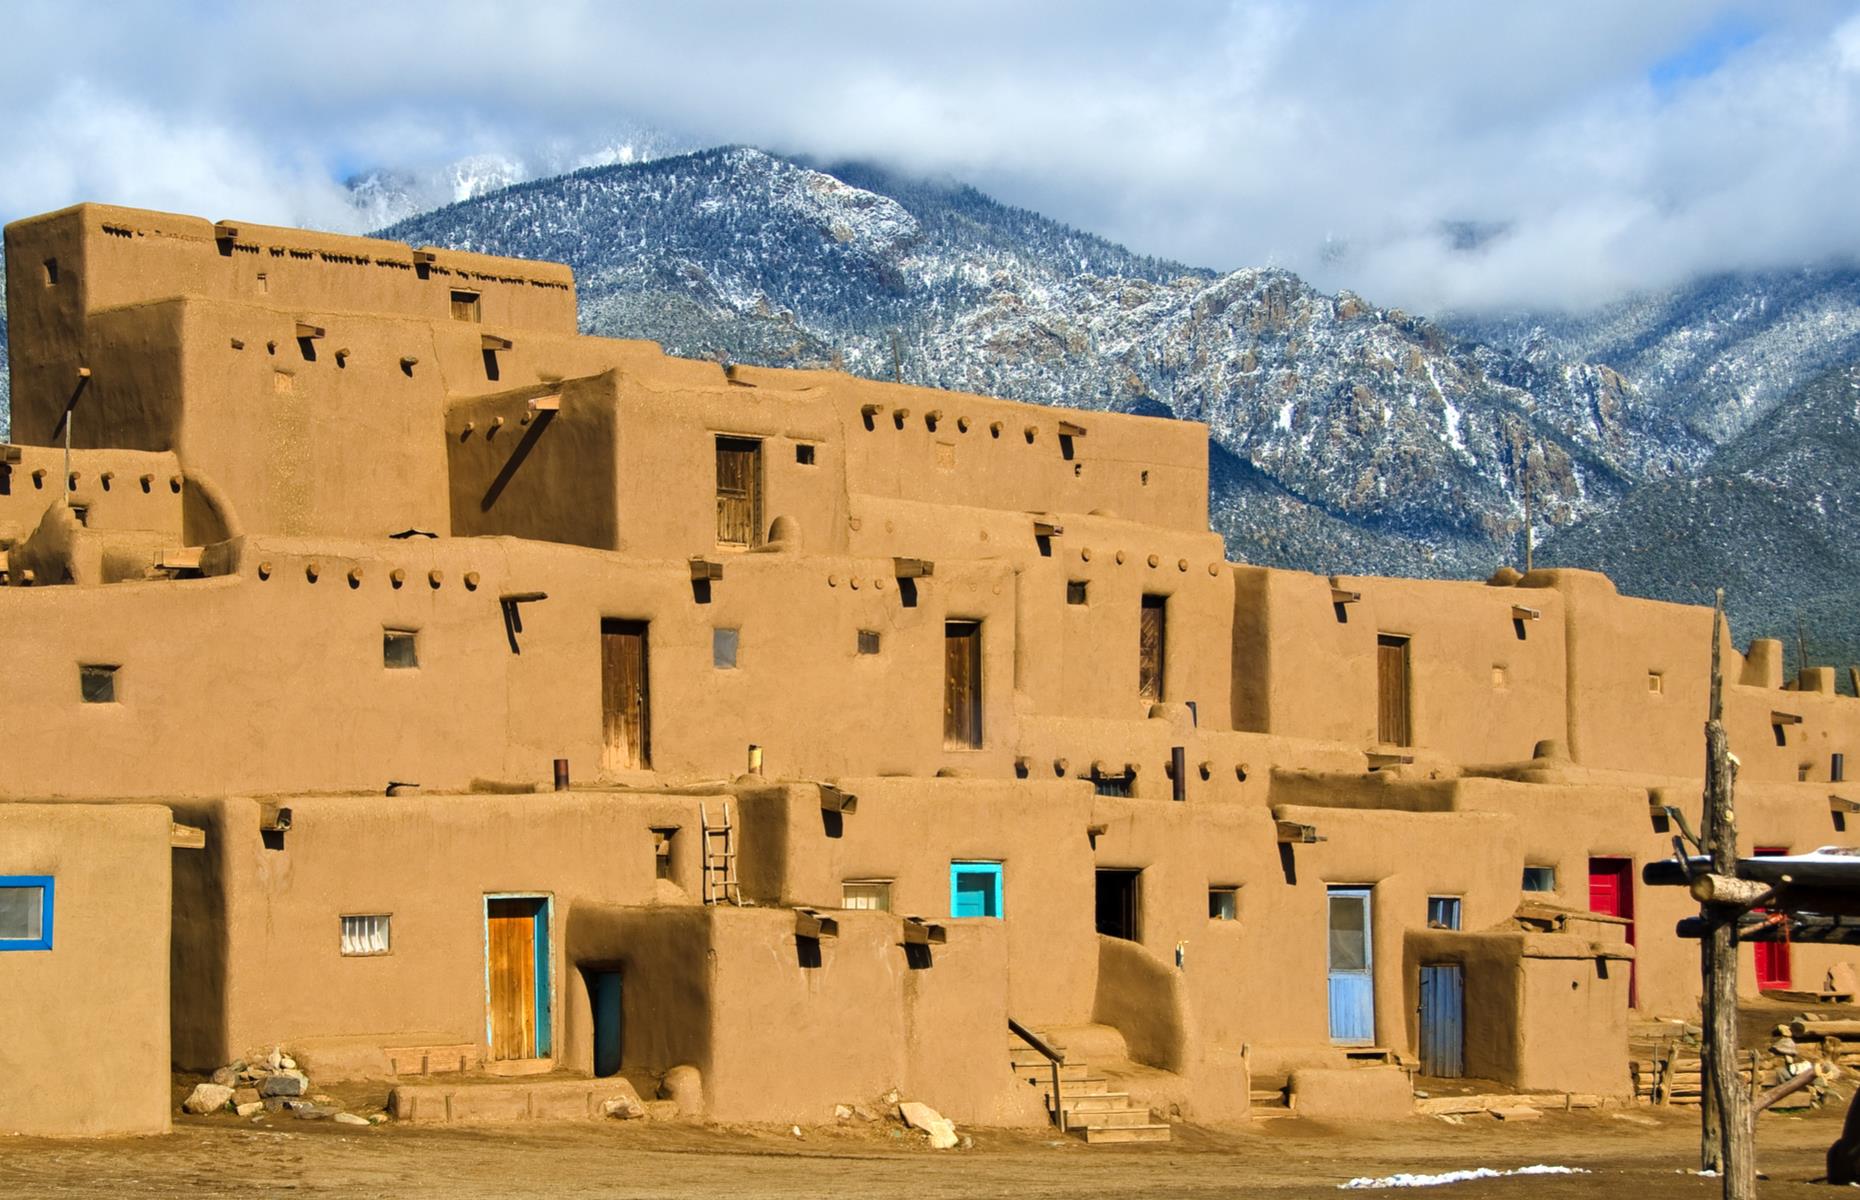 <p>The High Road portion of the trip passes through Chimayó, a historic and picturesque village known for its weaving tradition and El Santuario de Chimayó, an important 19th-century church and pilgrimage site. In Taos, there are treasures aplenty from cultural shrines like the Harwood Museum of Art to the Taos Pueblo, an adobe settlement designated a UNESCO World Heritage site. On the way back to Santa Fe, the sweeping river views steal the show.</p>  <p><a href="http://bit.ly/3roL4wv"><strong>Love this? Follow our Facebook page for more travel inspiration</strong></a></p>